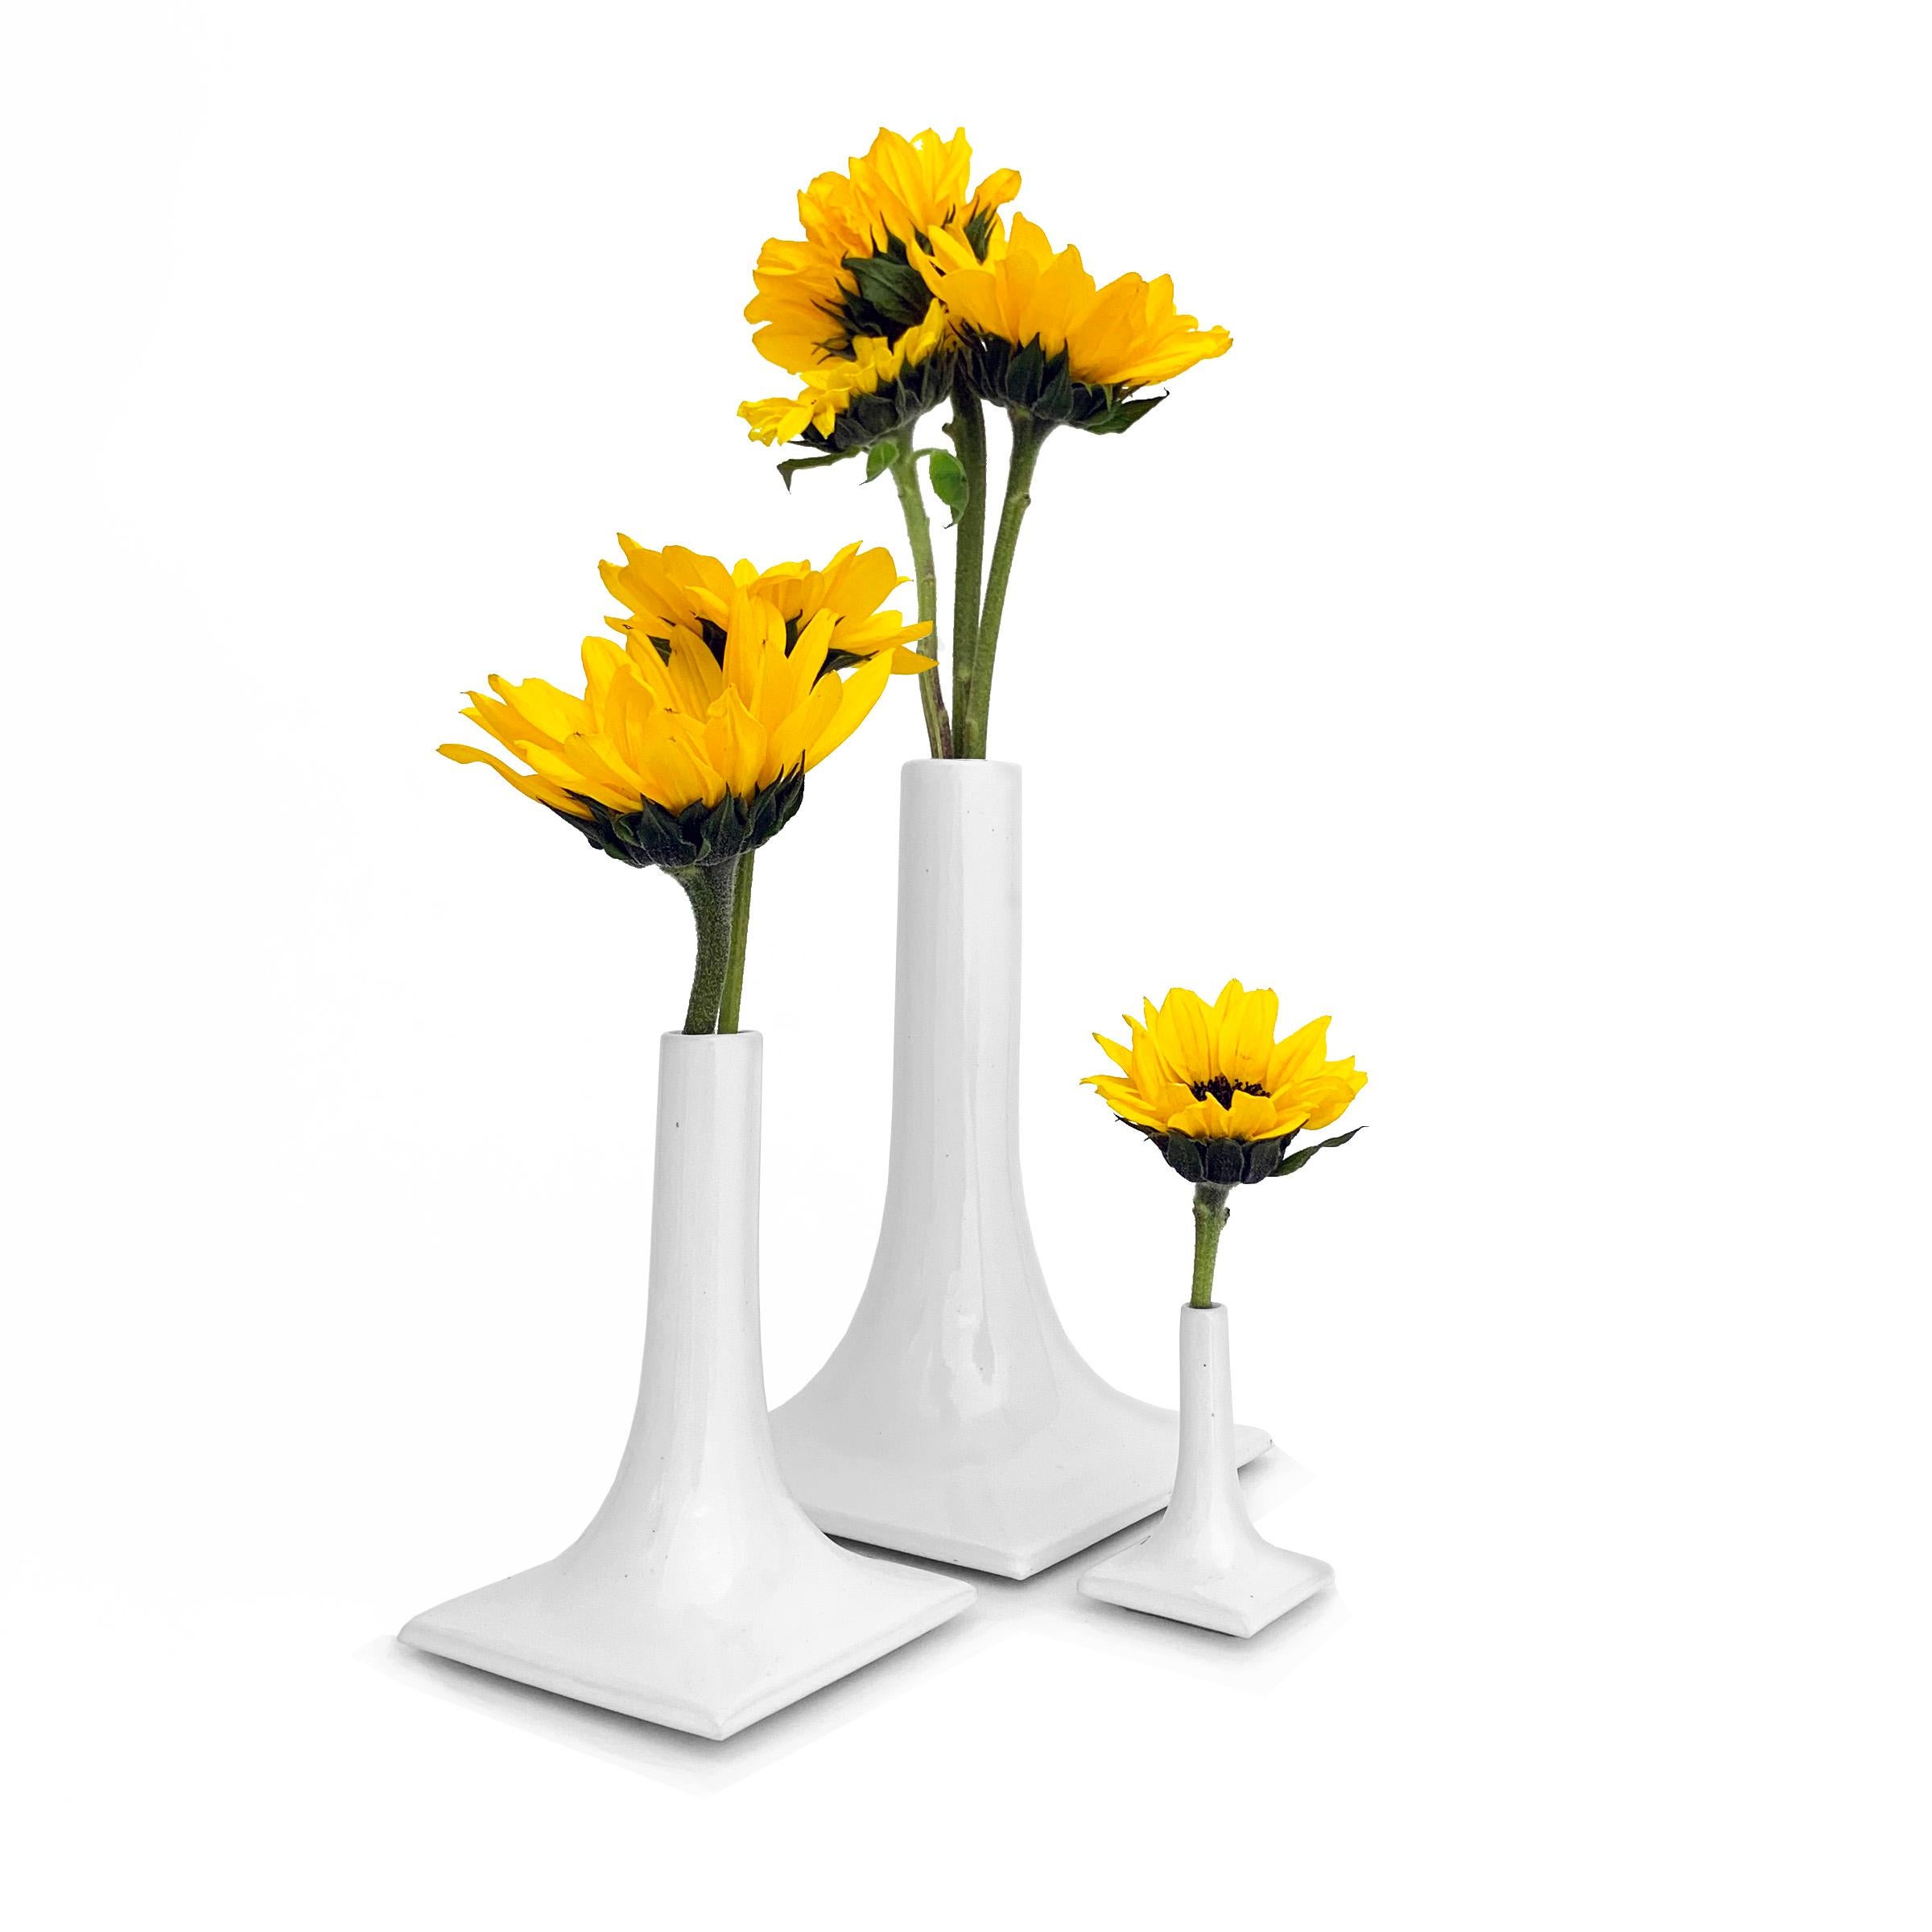 Treat yourself and your table with an iconic modern mini table scape of ceramic stacks vases. Proportional in size with a 3